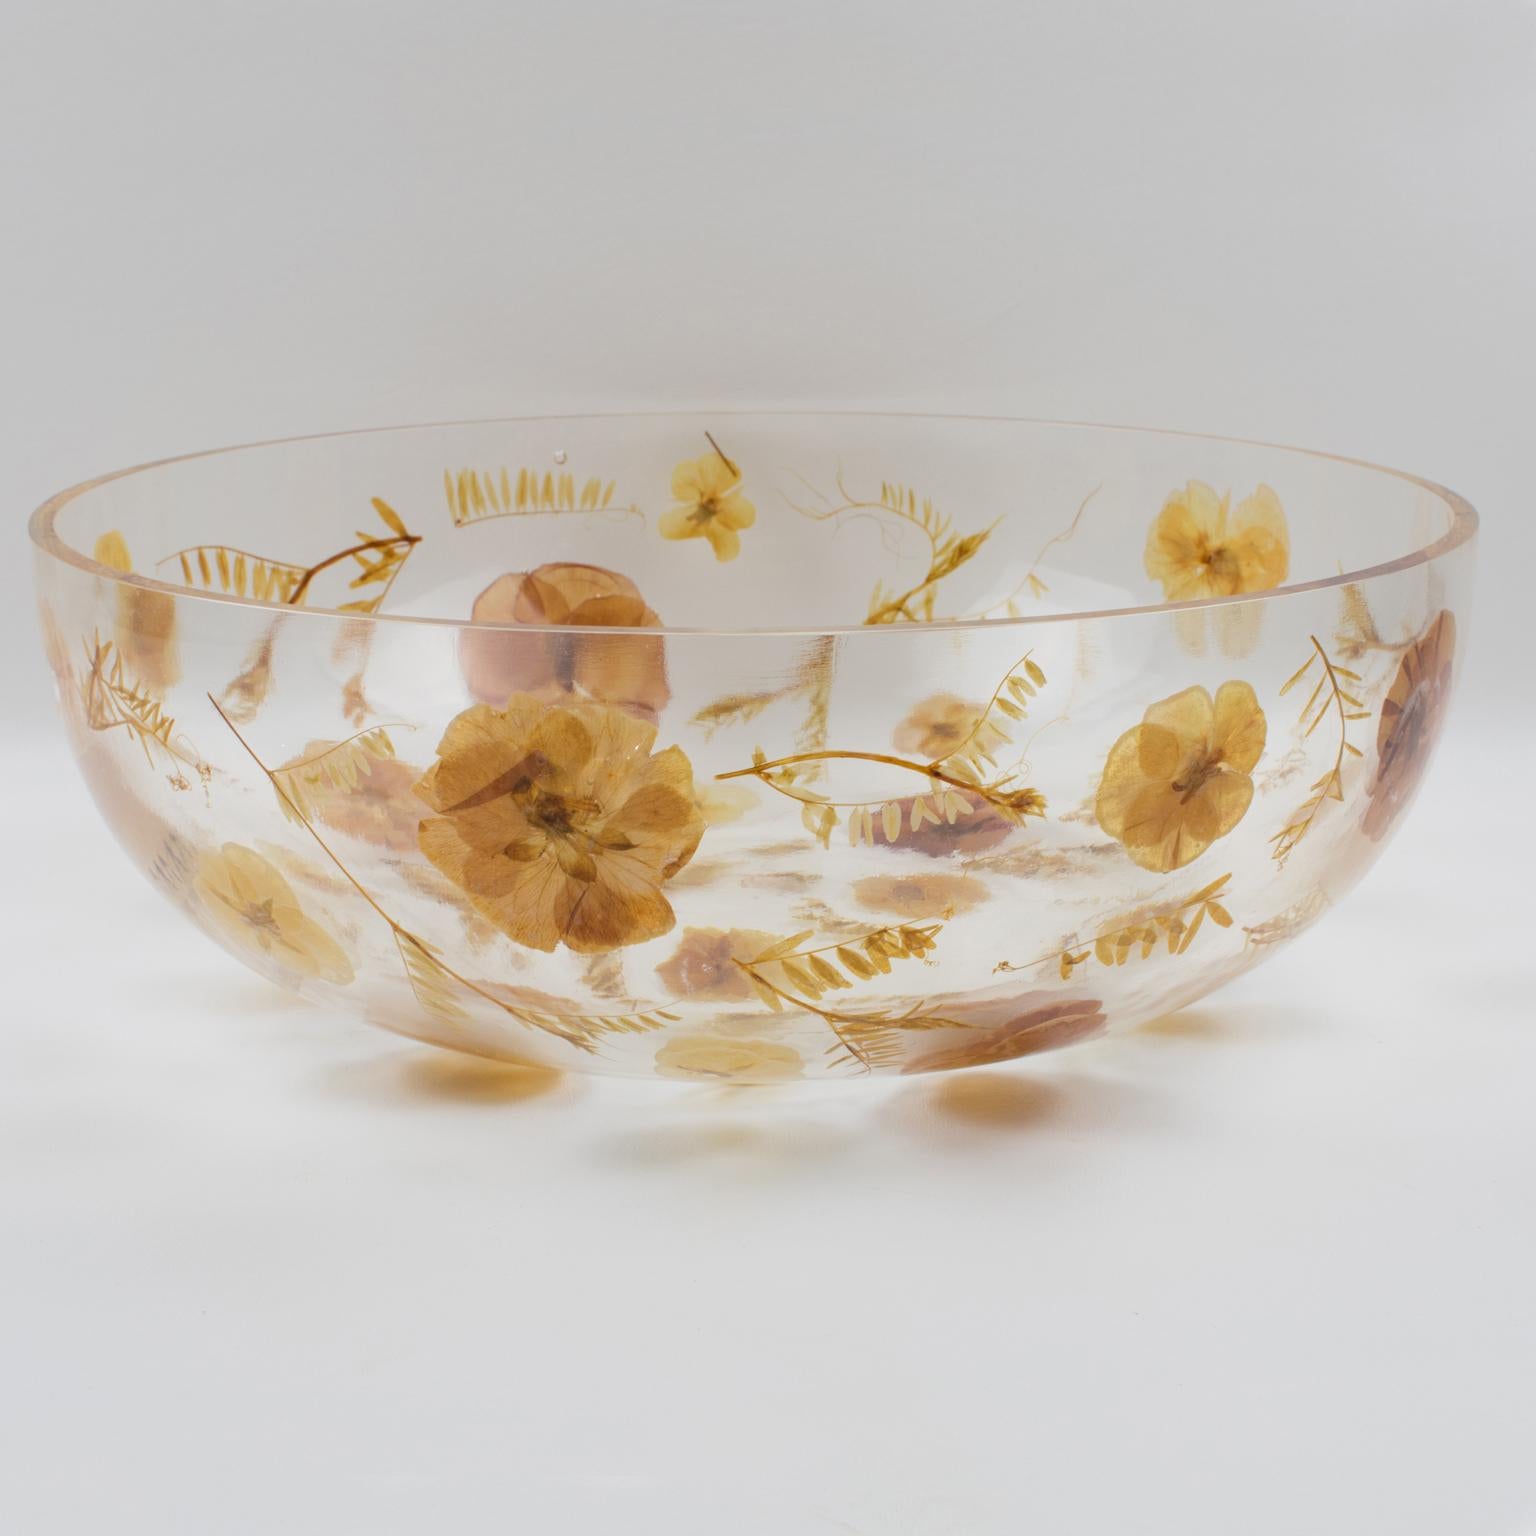 1970s resin decorative bowl, centerpiece, or serving dish by Resinplast, Italy. Extra thick clear resin or acrylic deep rounded oversized bowl shape with assorted real autumn leaves and dried flowers embedded in the material. The natural light